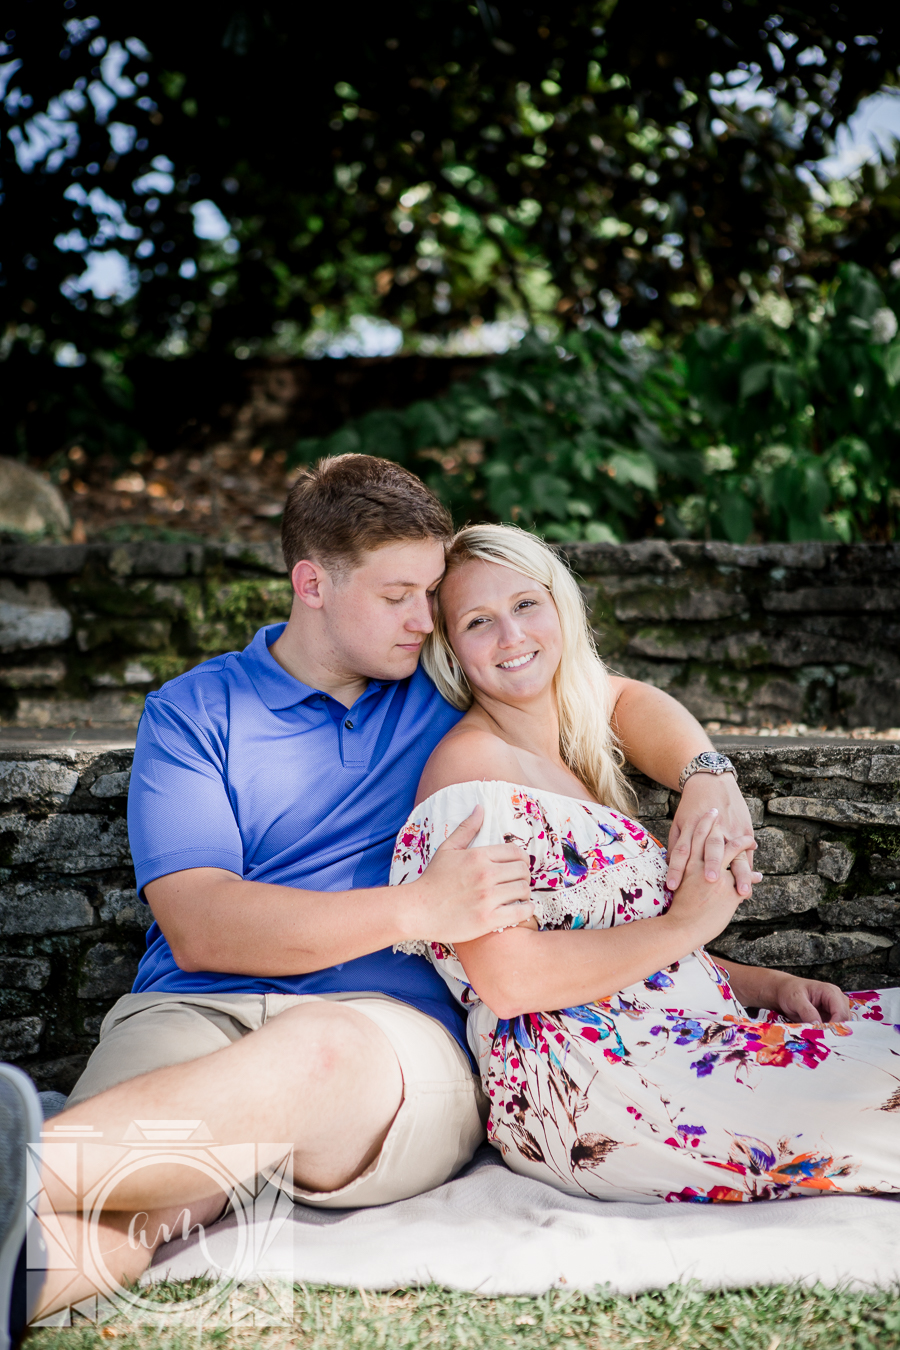 Her back against his chest sitting engagement photo by Knoxville Wedding Photographer, Amanda May Photos.